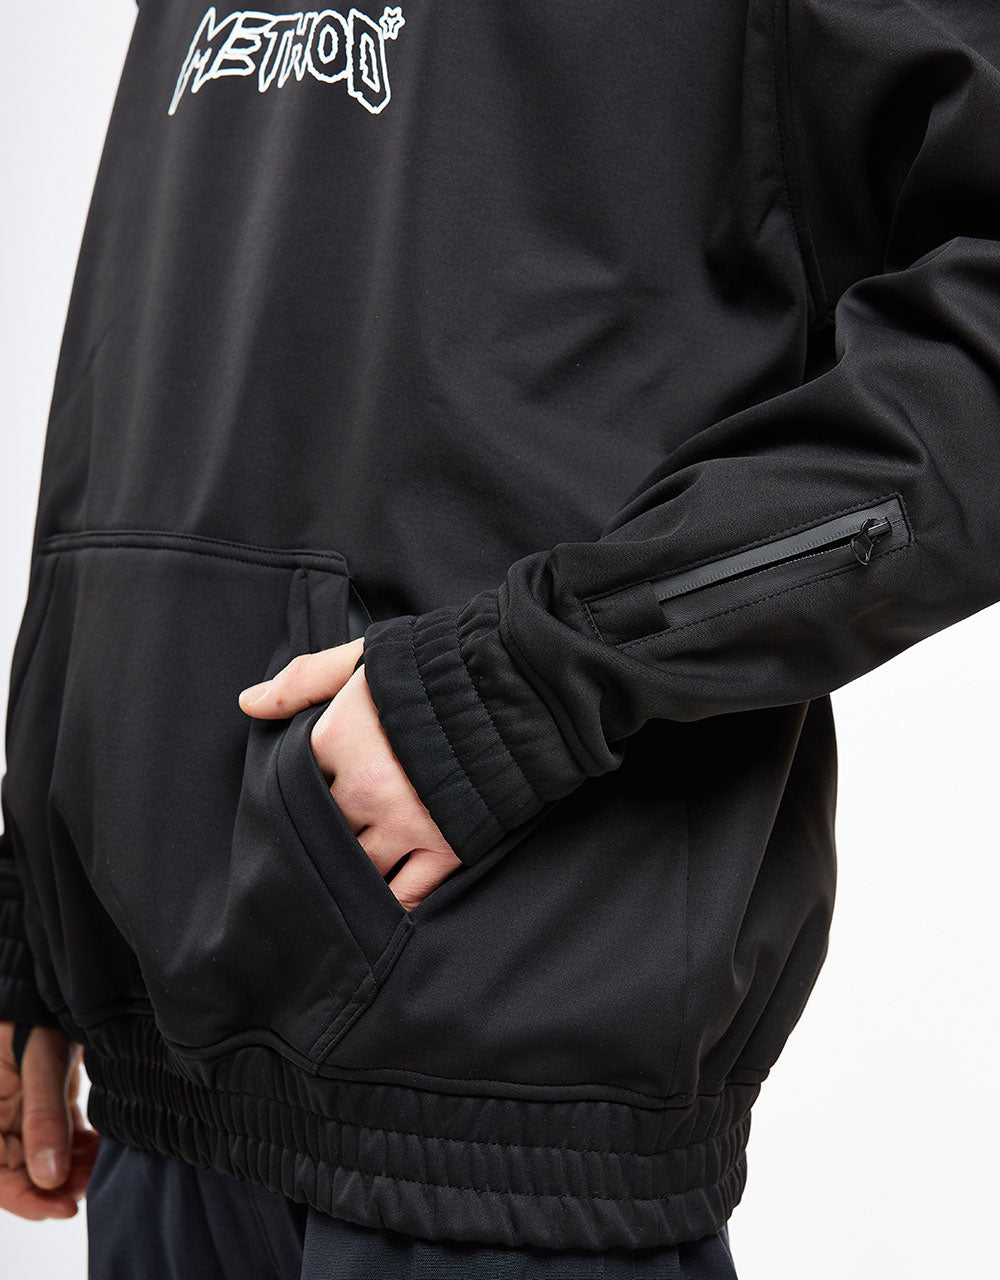 Method Technical Riding Pullover Hoodie - Black